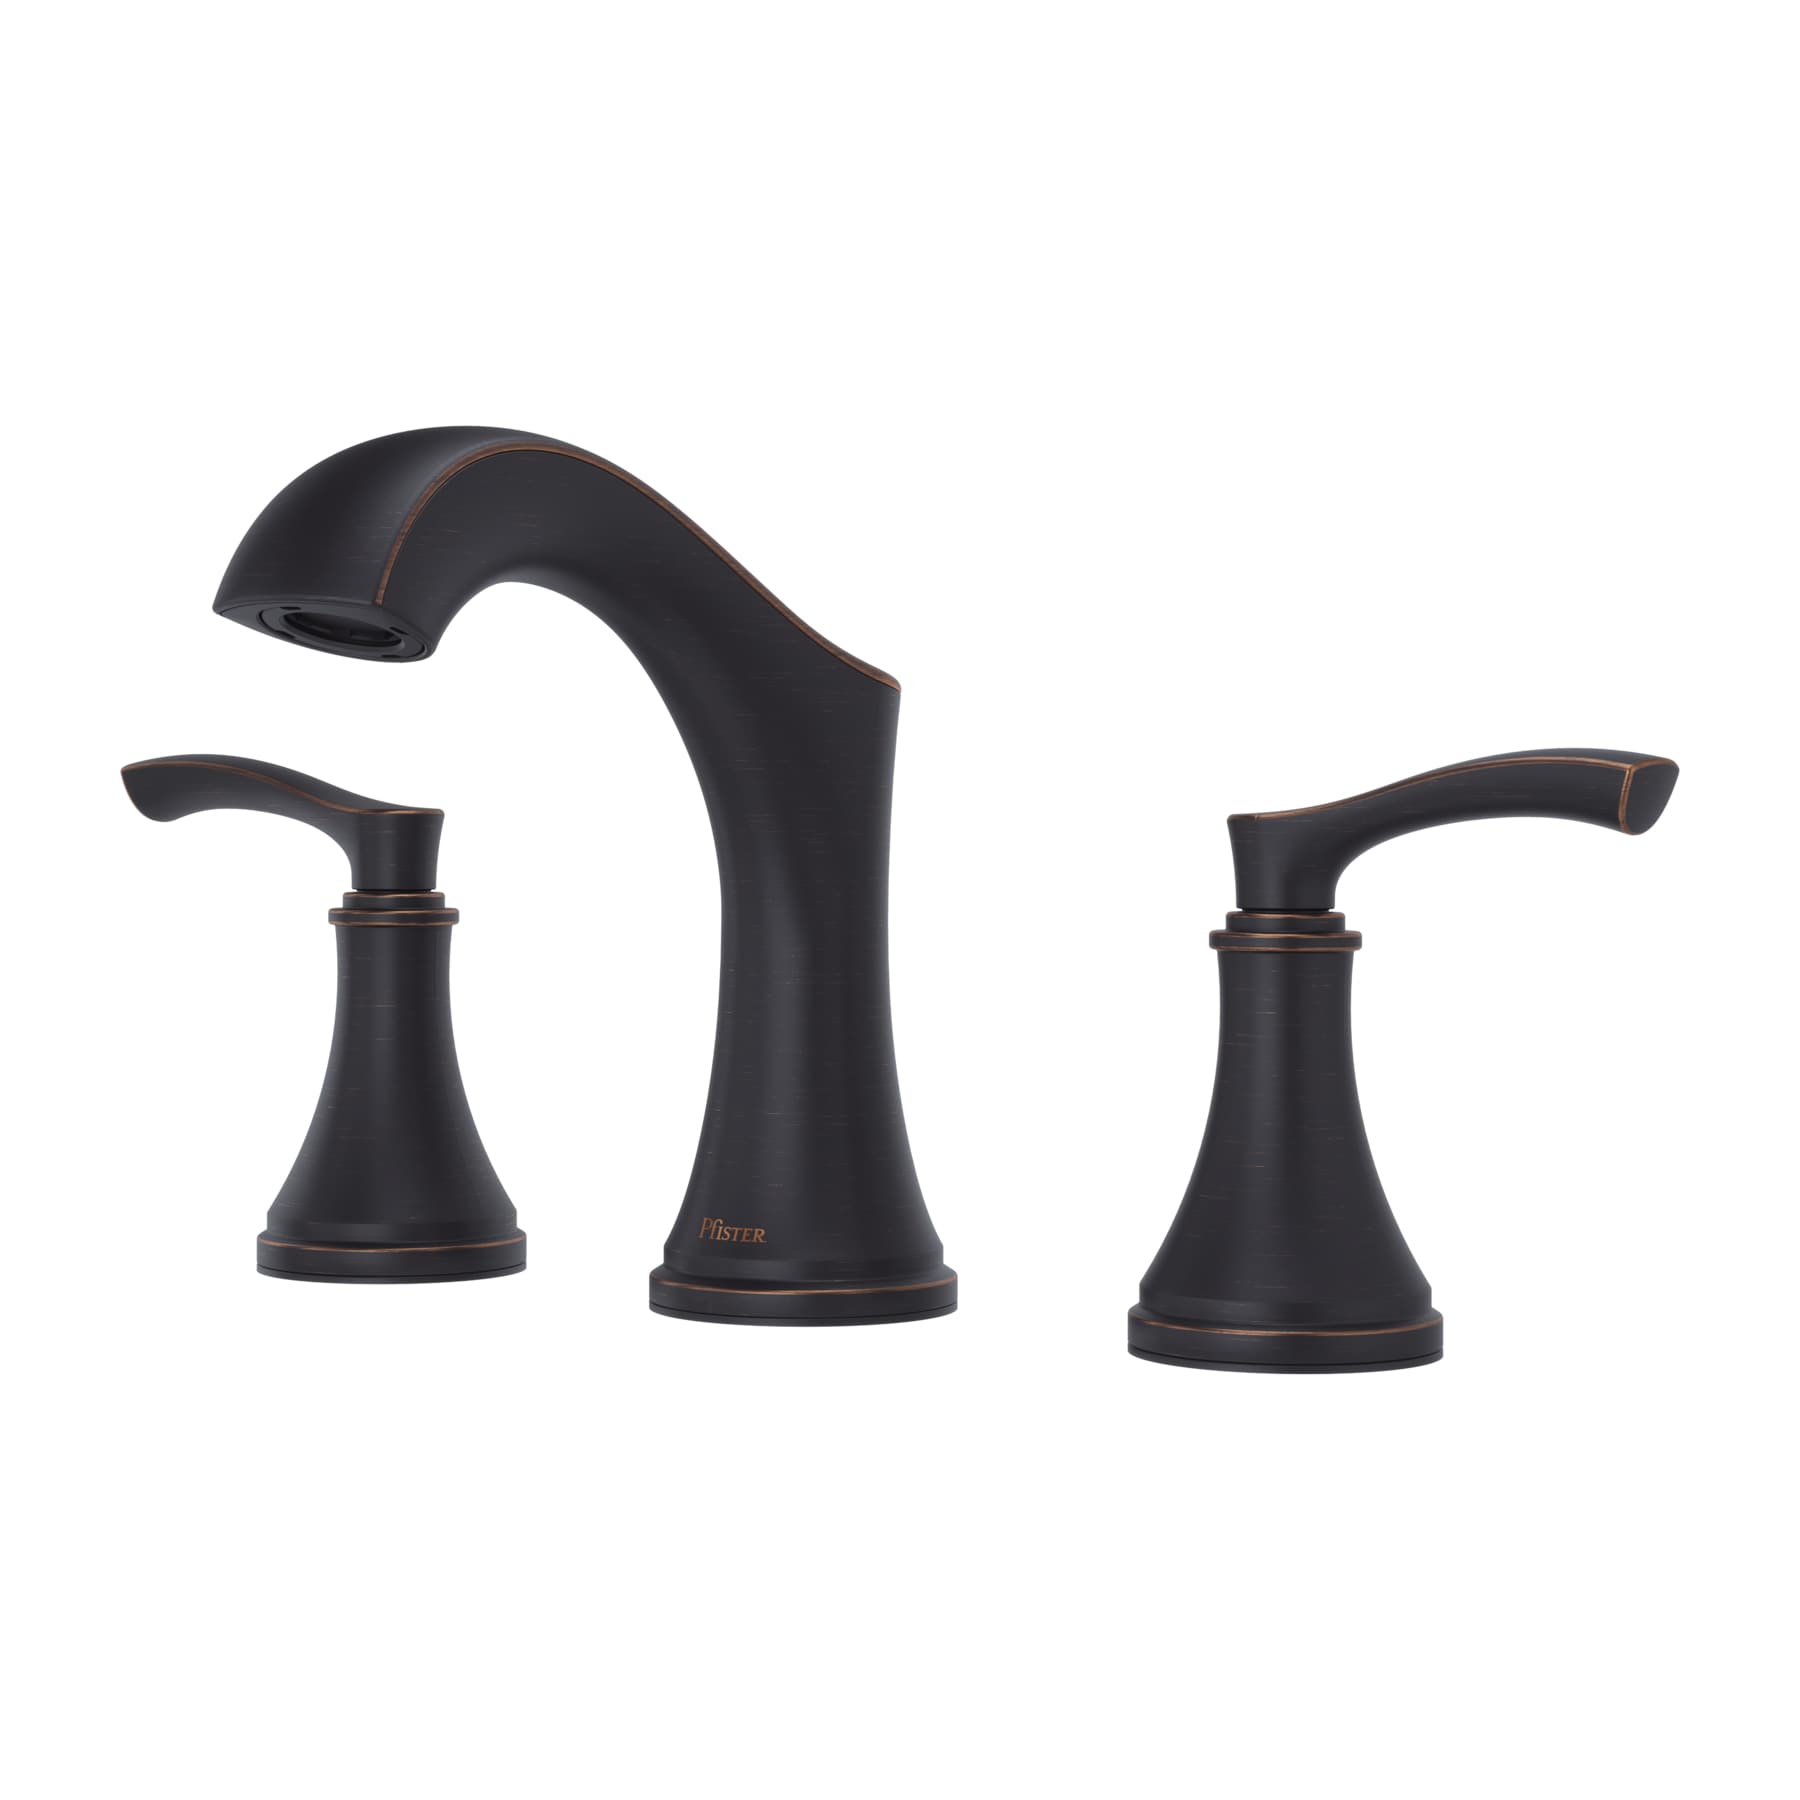 Pfister Auden Tuscan Bronze 2-handle Widespread WaterSense Mid-arc Bathroom Sink Faucet with Drain